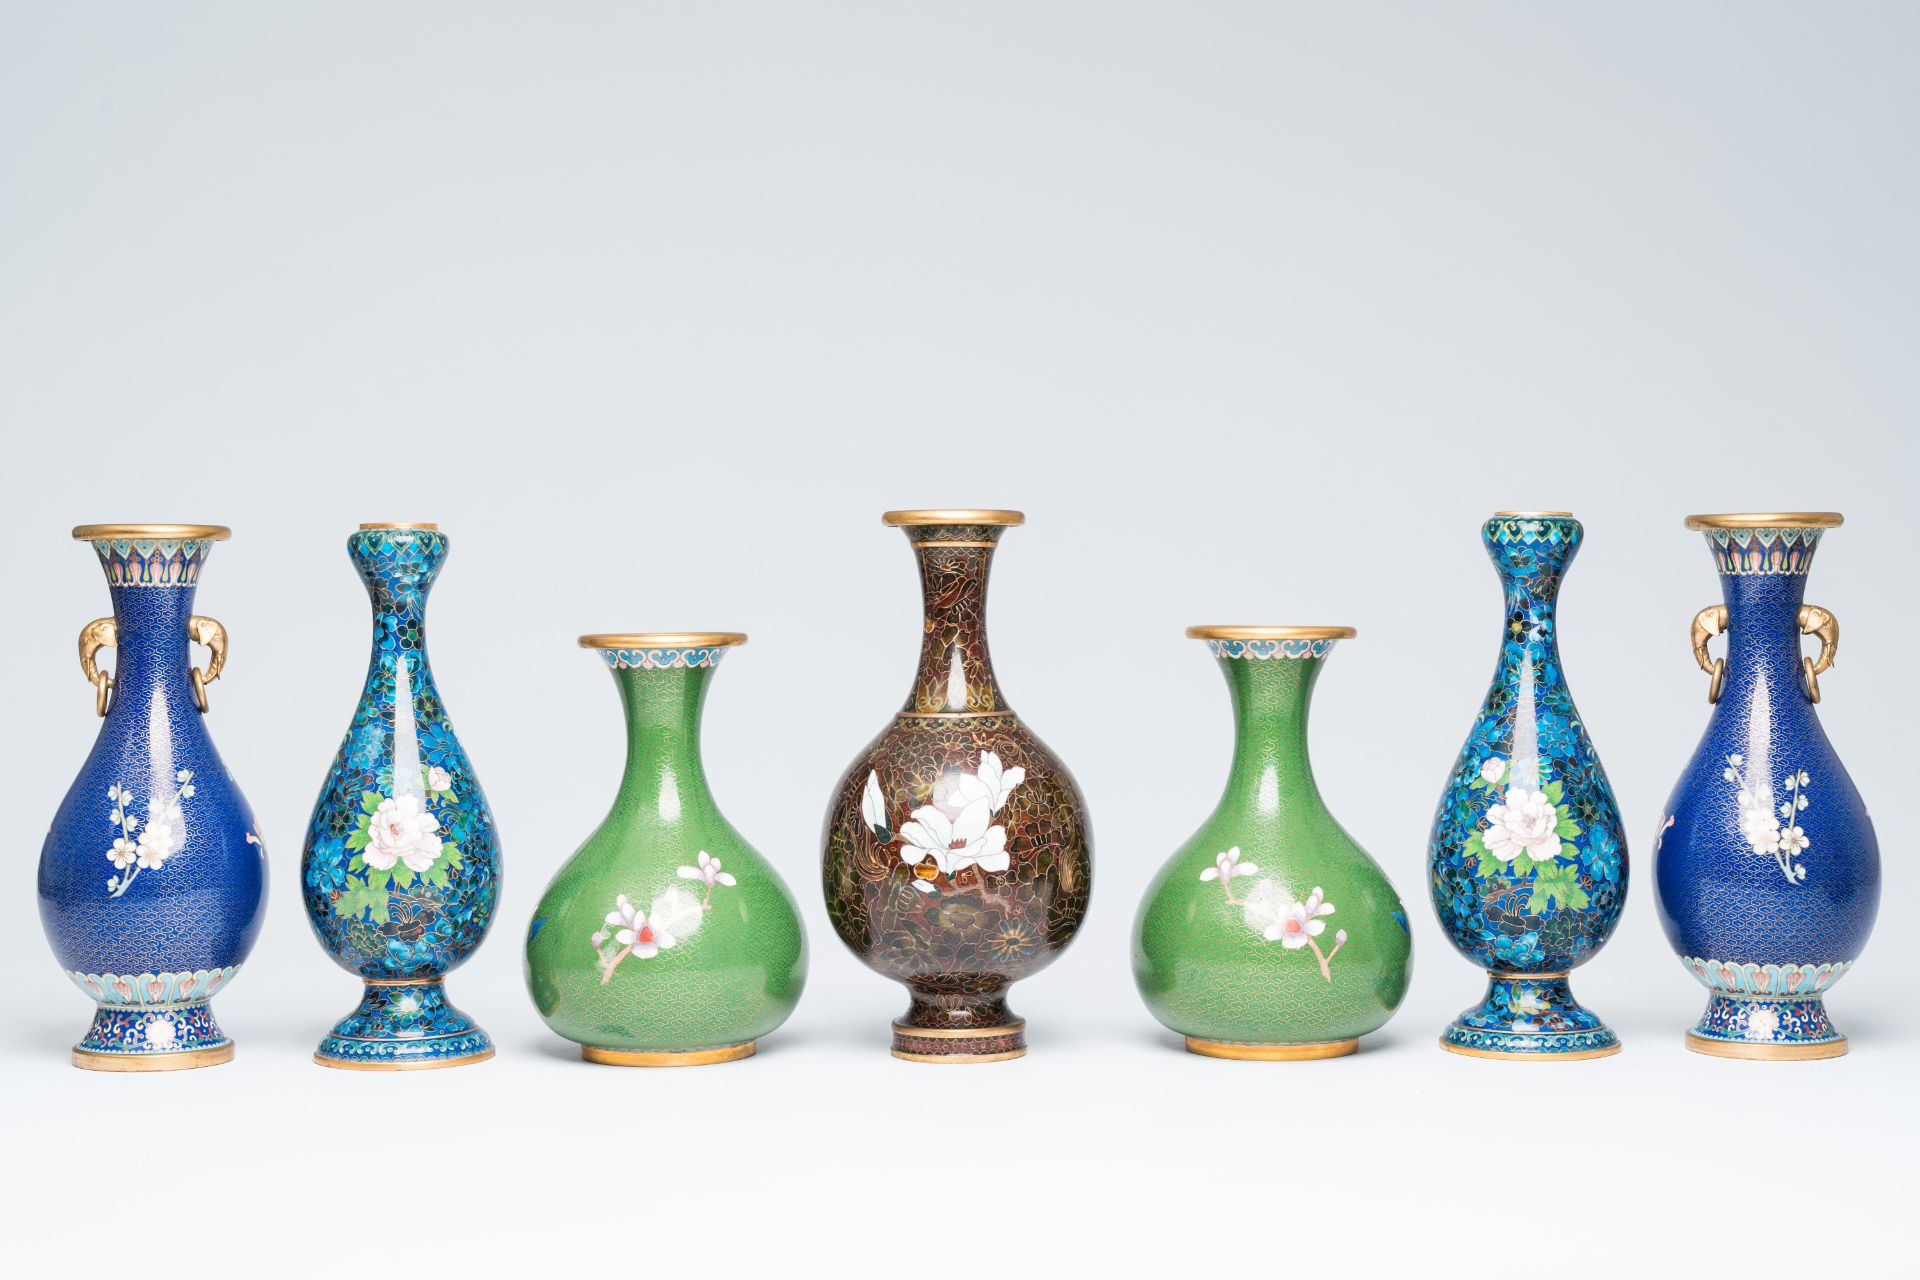 Three pairs of Chinese cloisonne vases with floral design and a 'proud peacock' vase, 20th C. - Image 4 of 9